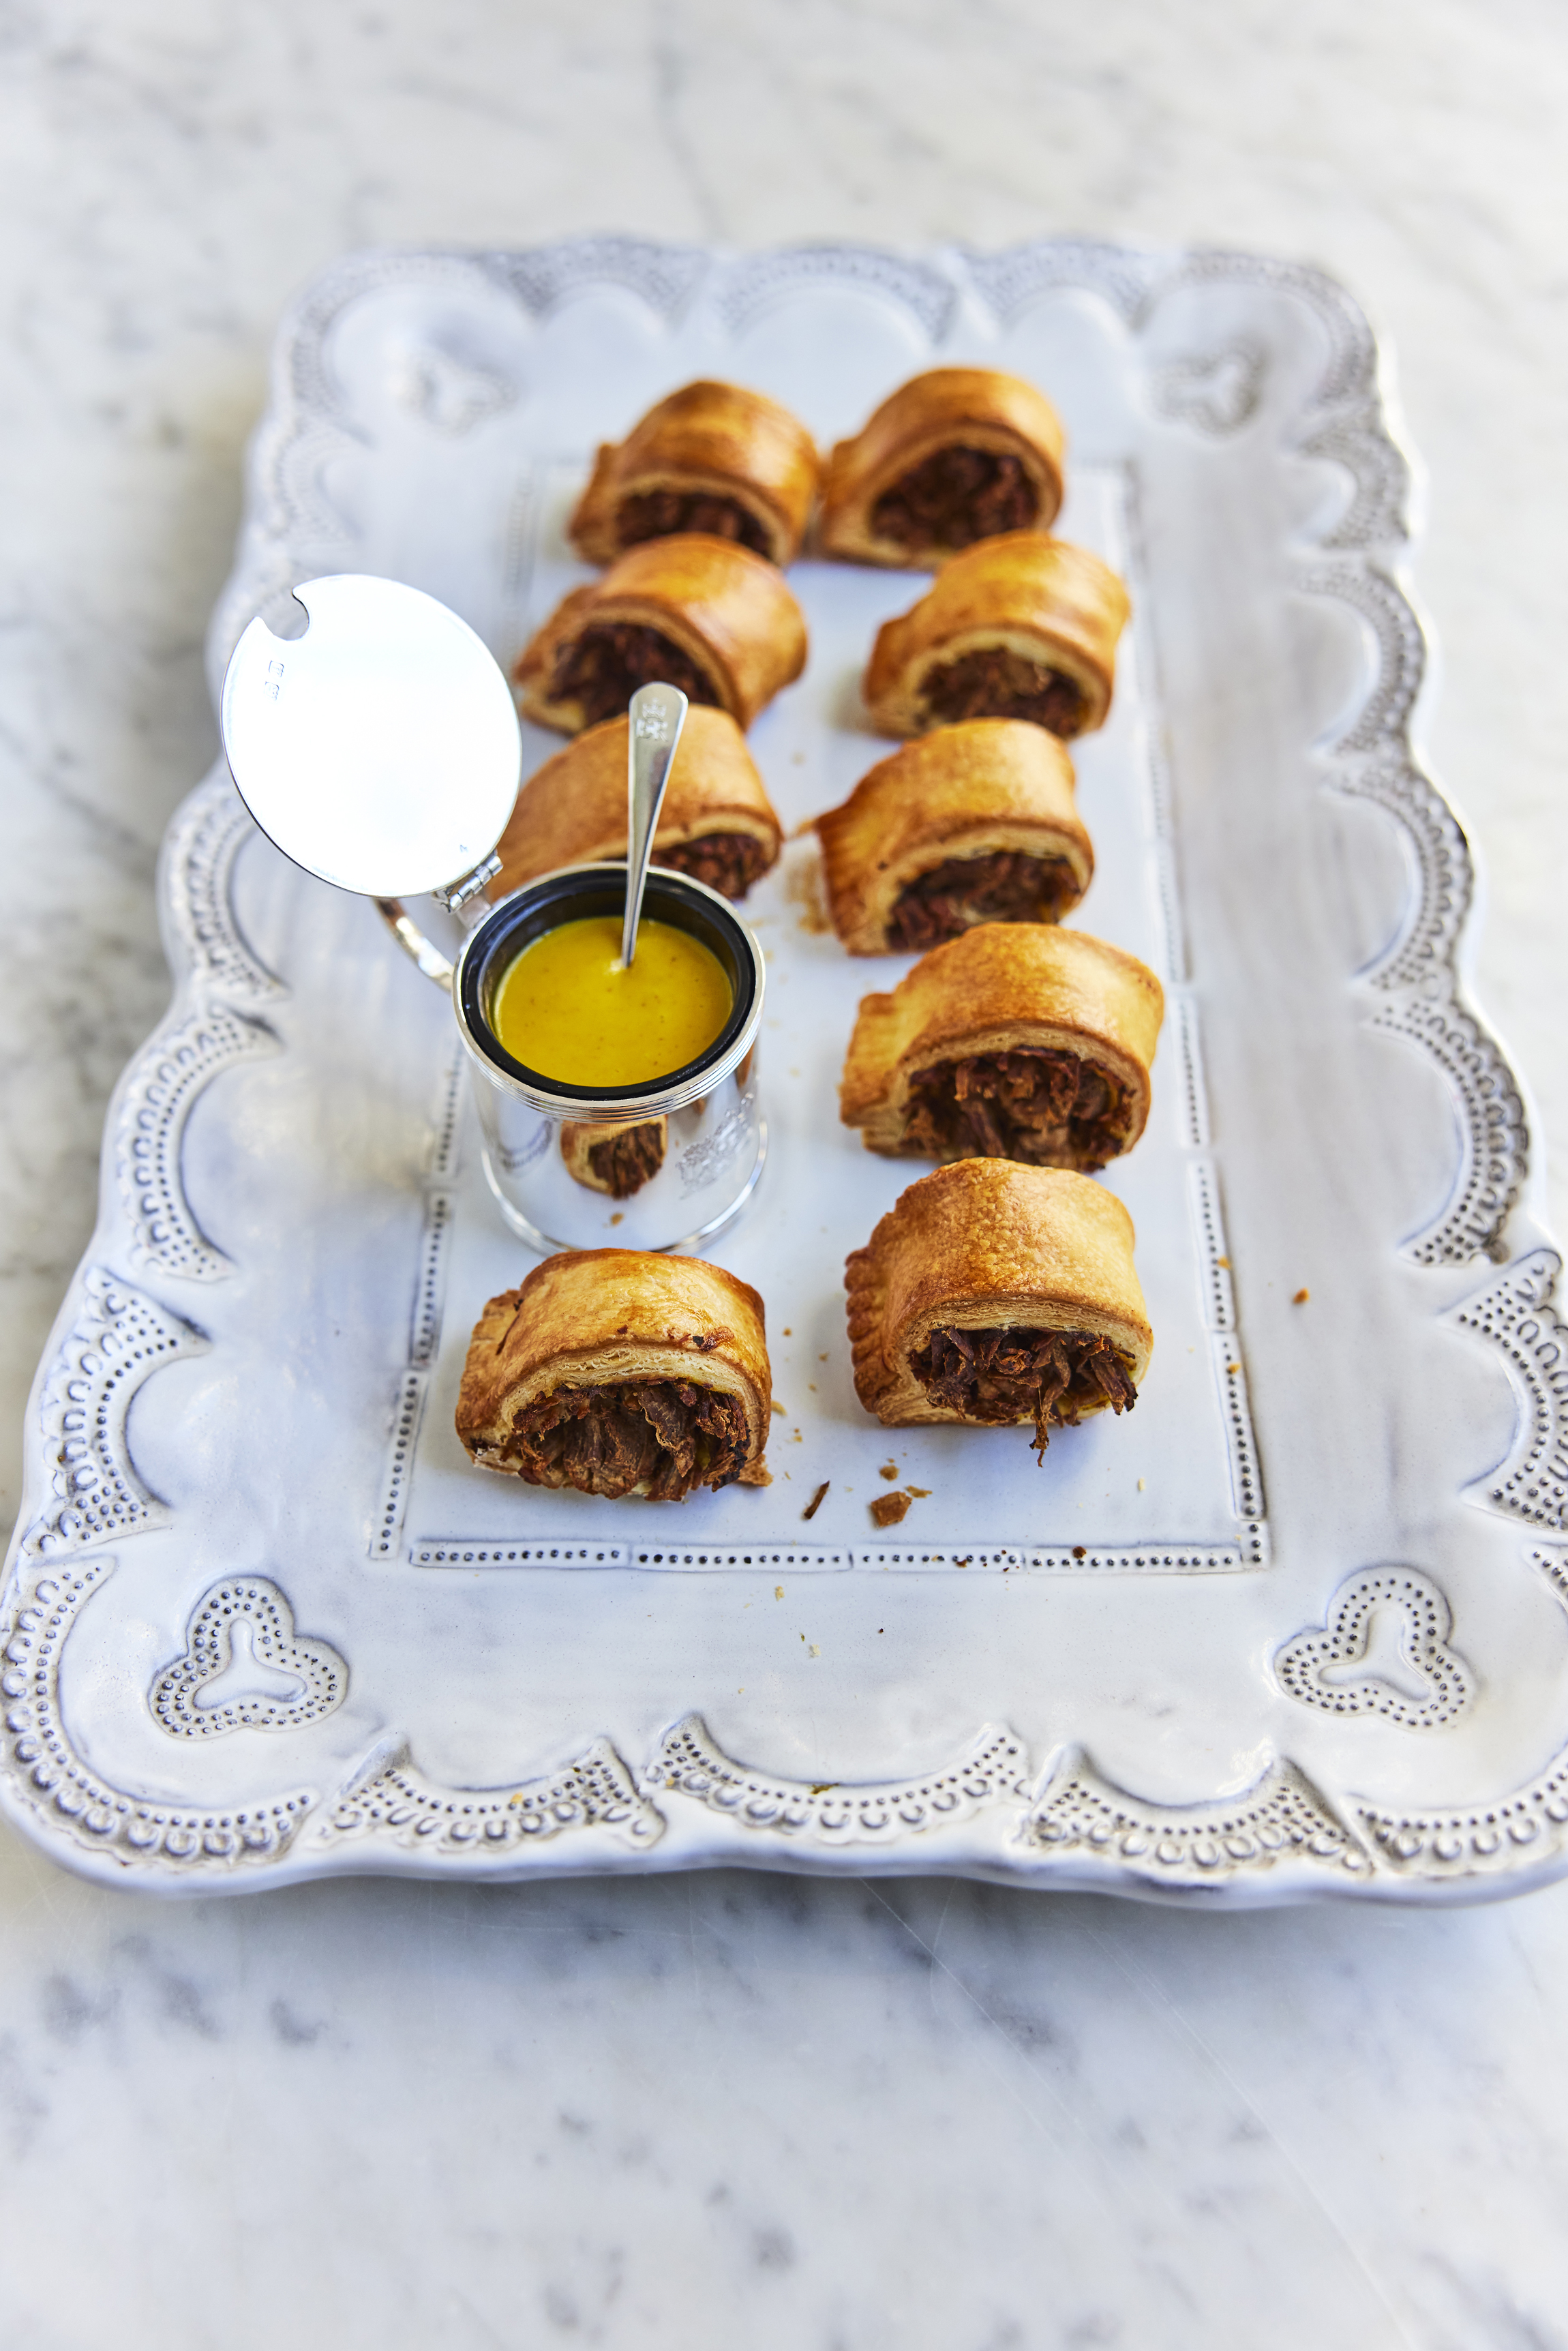 Seswaa and English mustard ‘sausage’ rolls from The Platinum Jubilee Cookbook